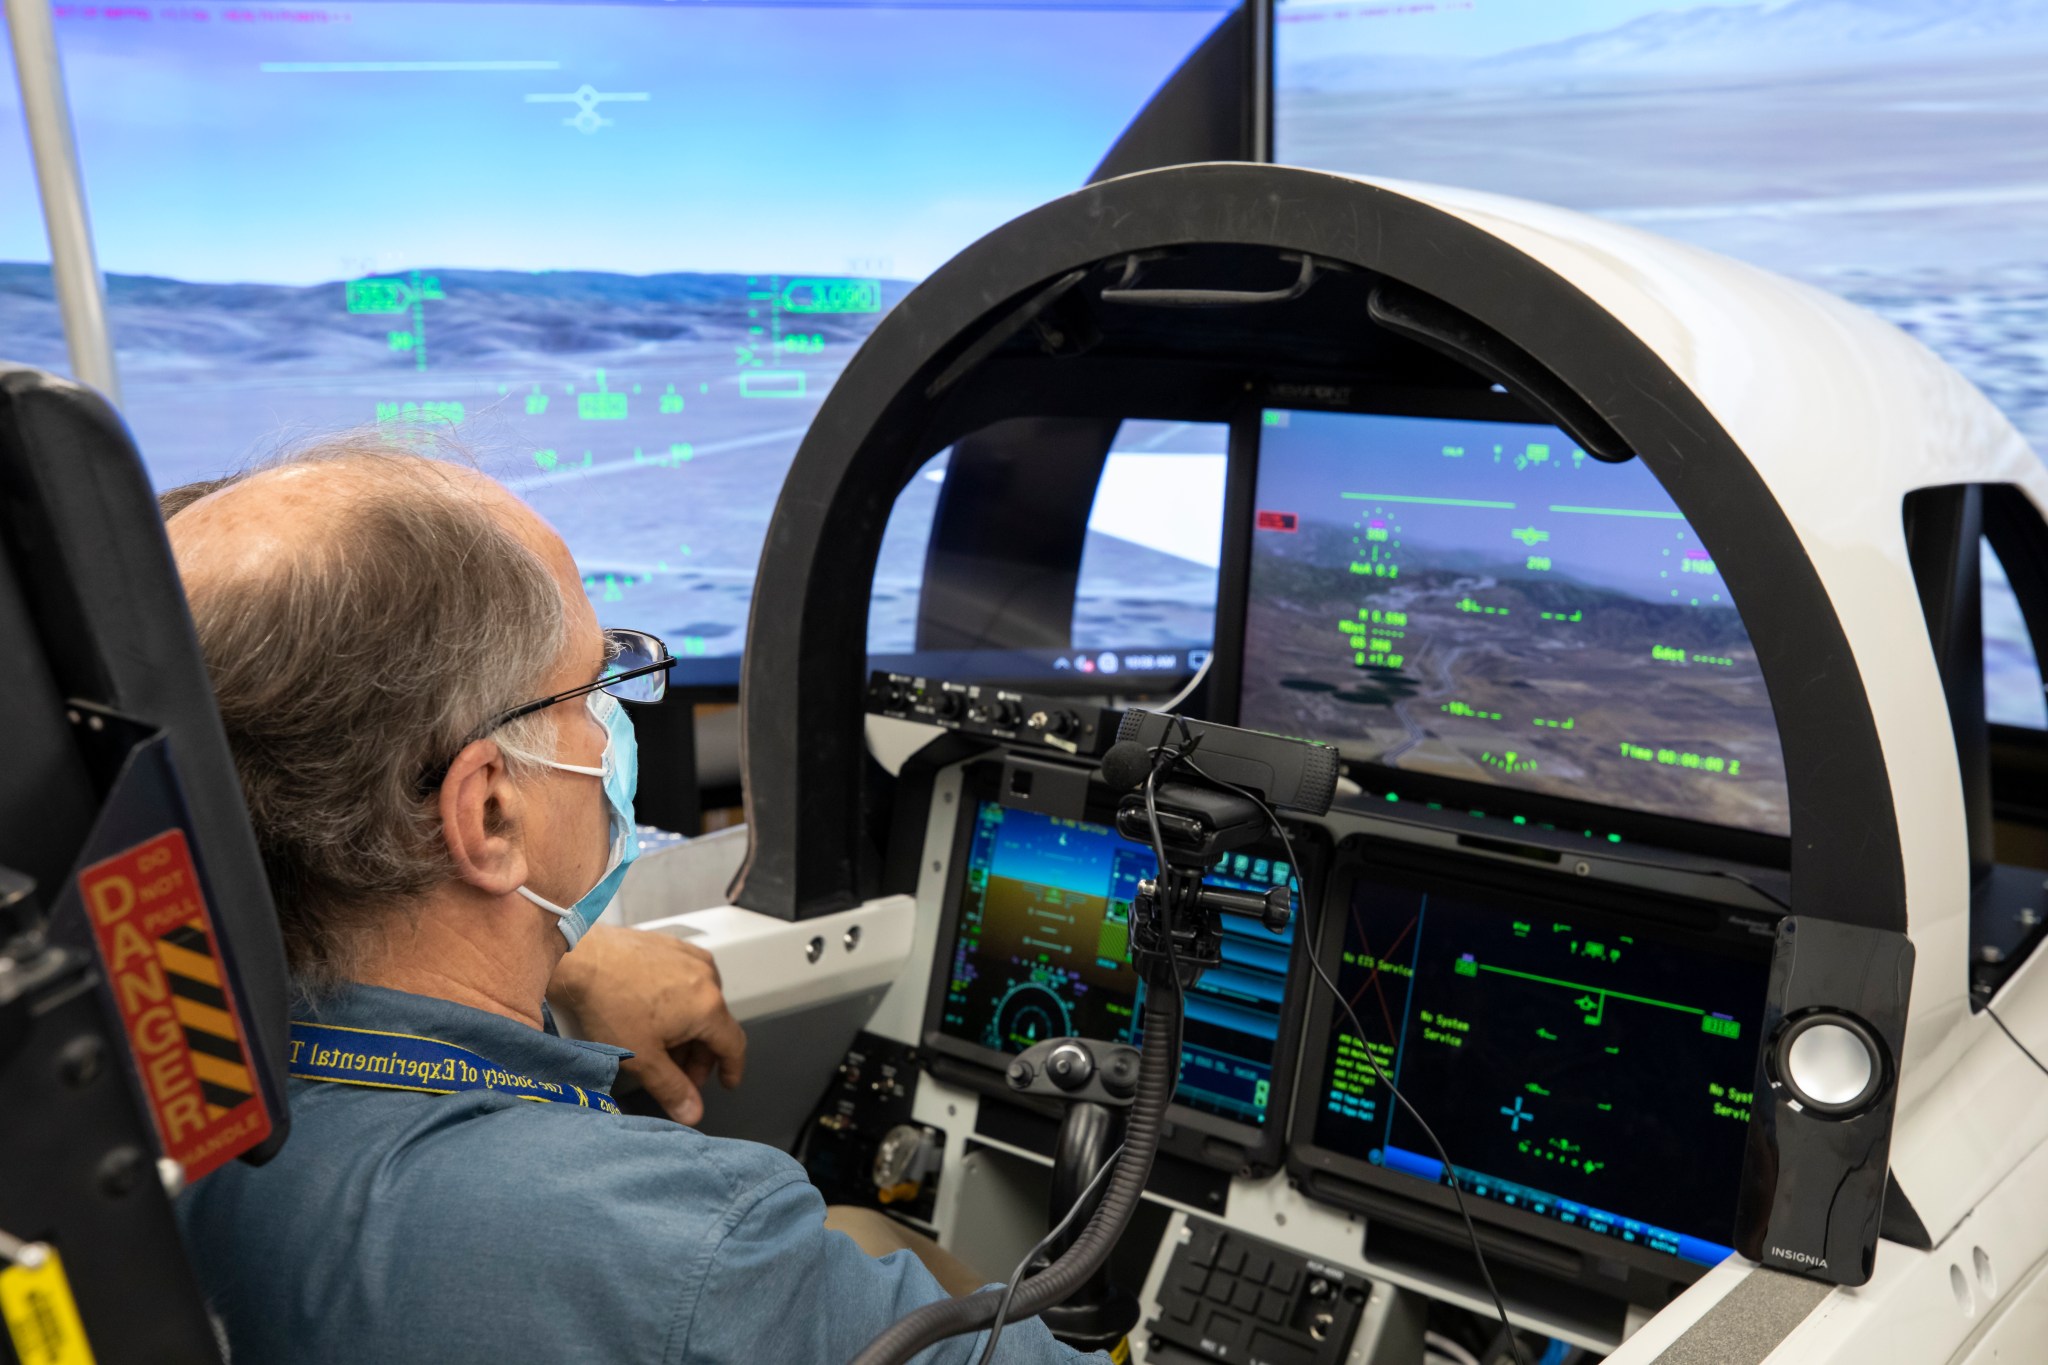 Flight software being tested in cockpit simulation.